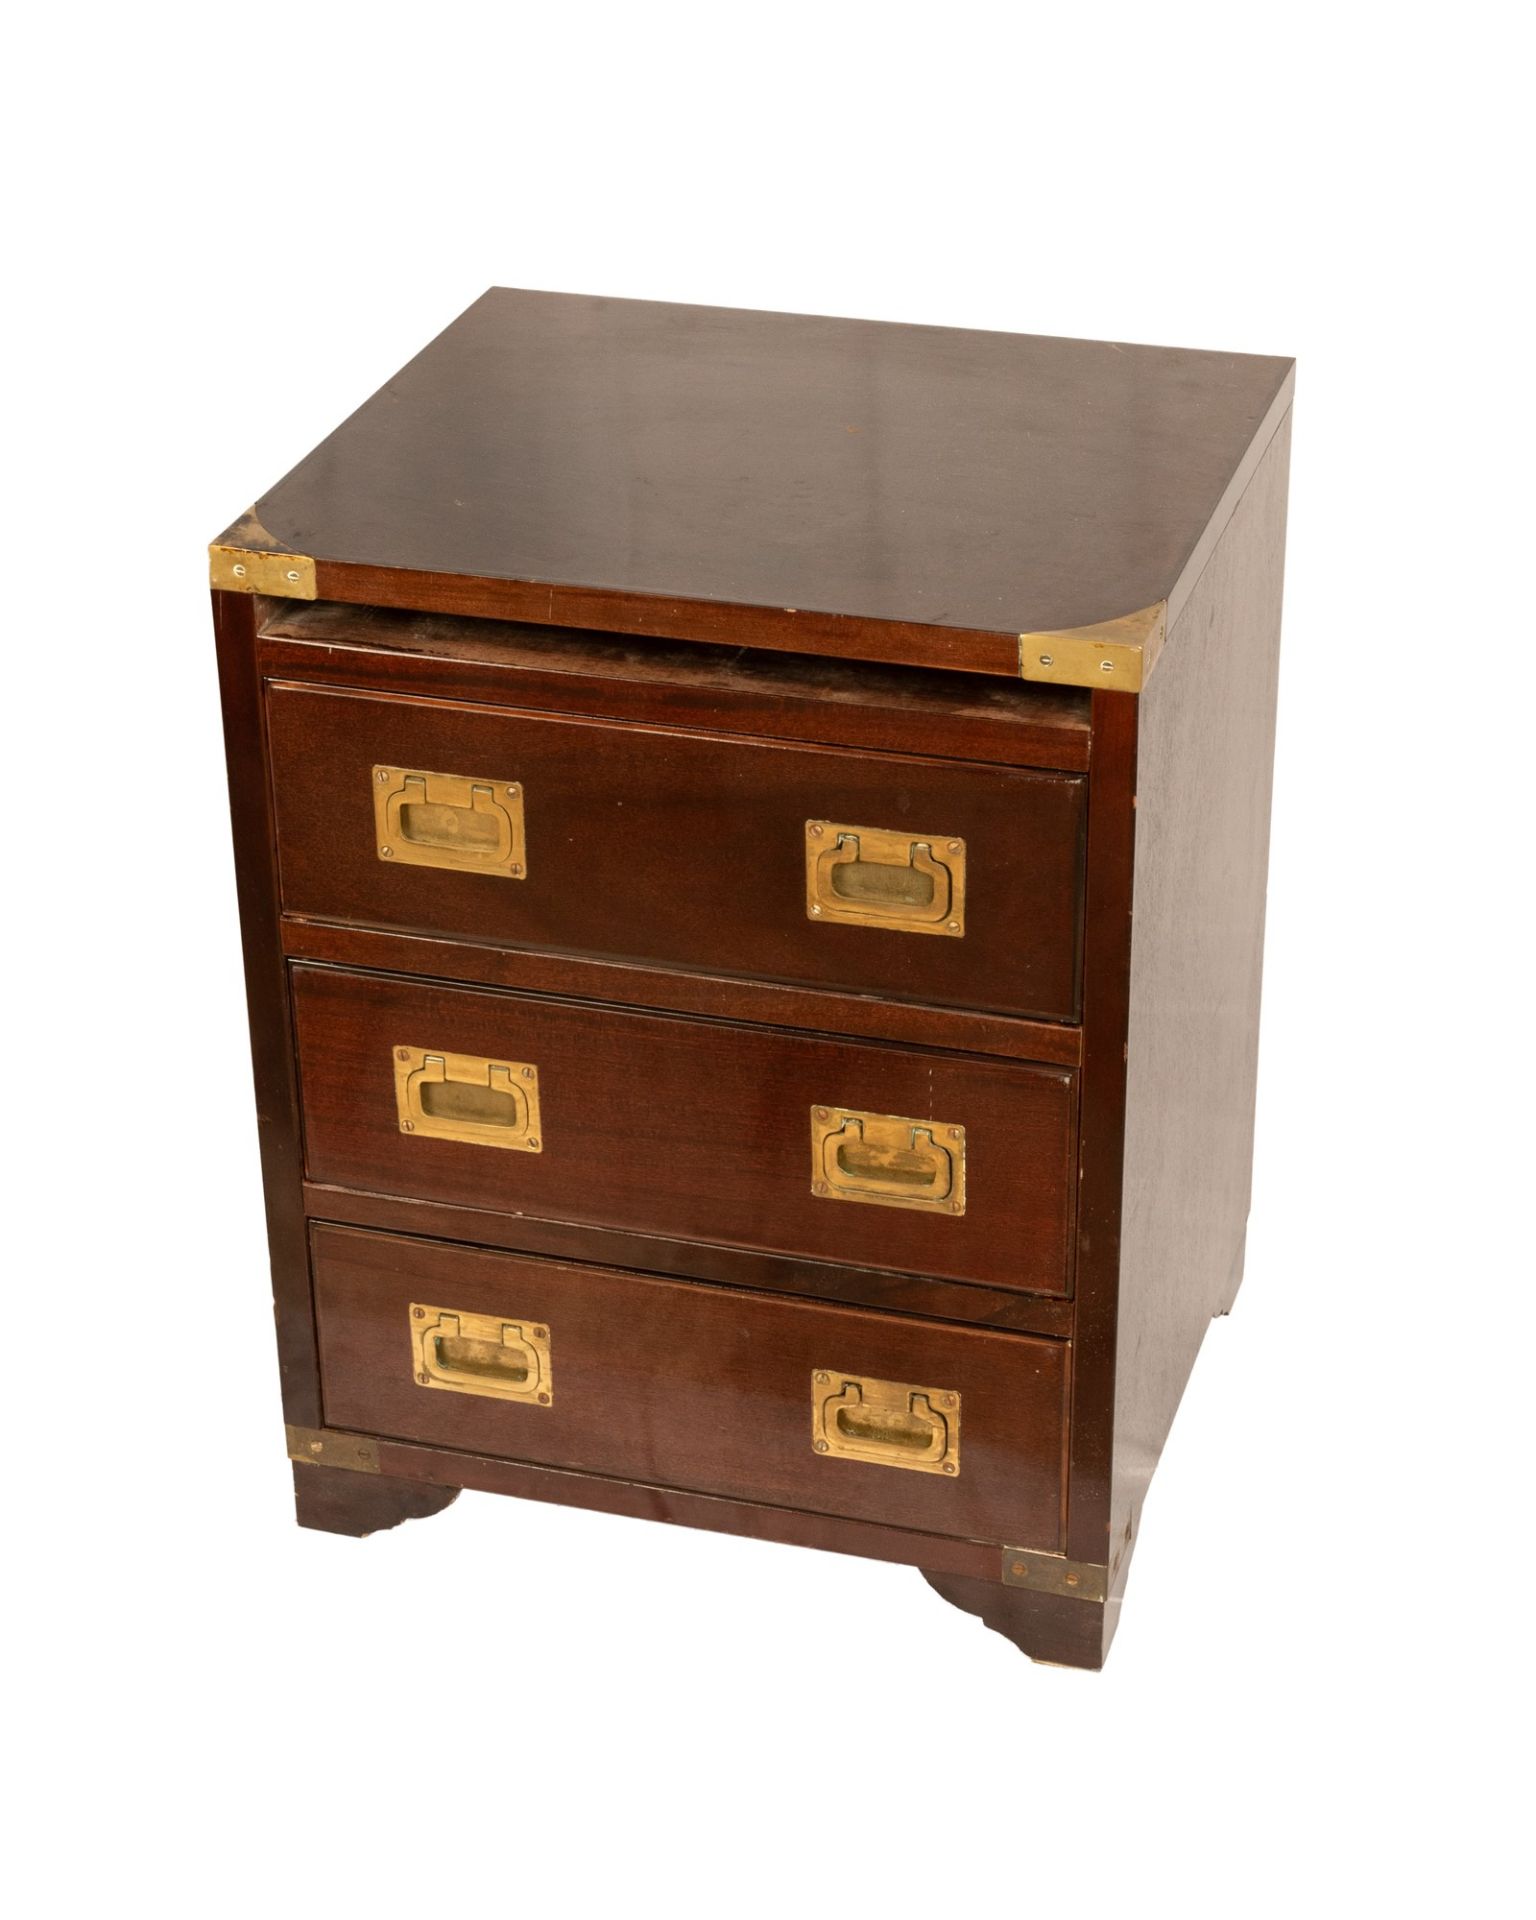 Antica Marina wooden bedside table with brass inserts - Image 16 of 23